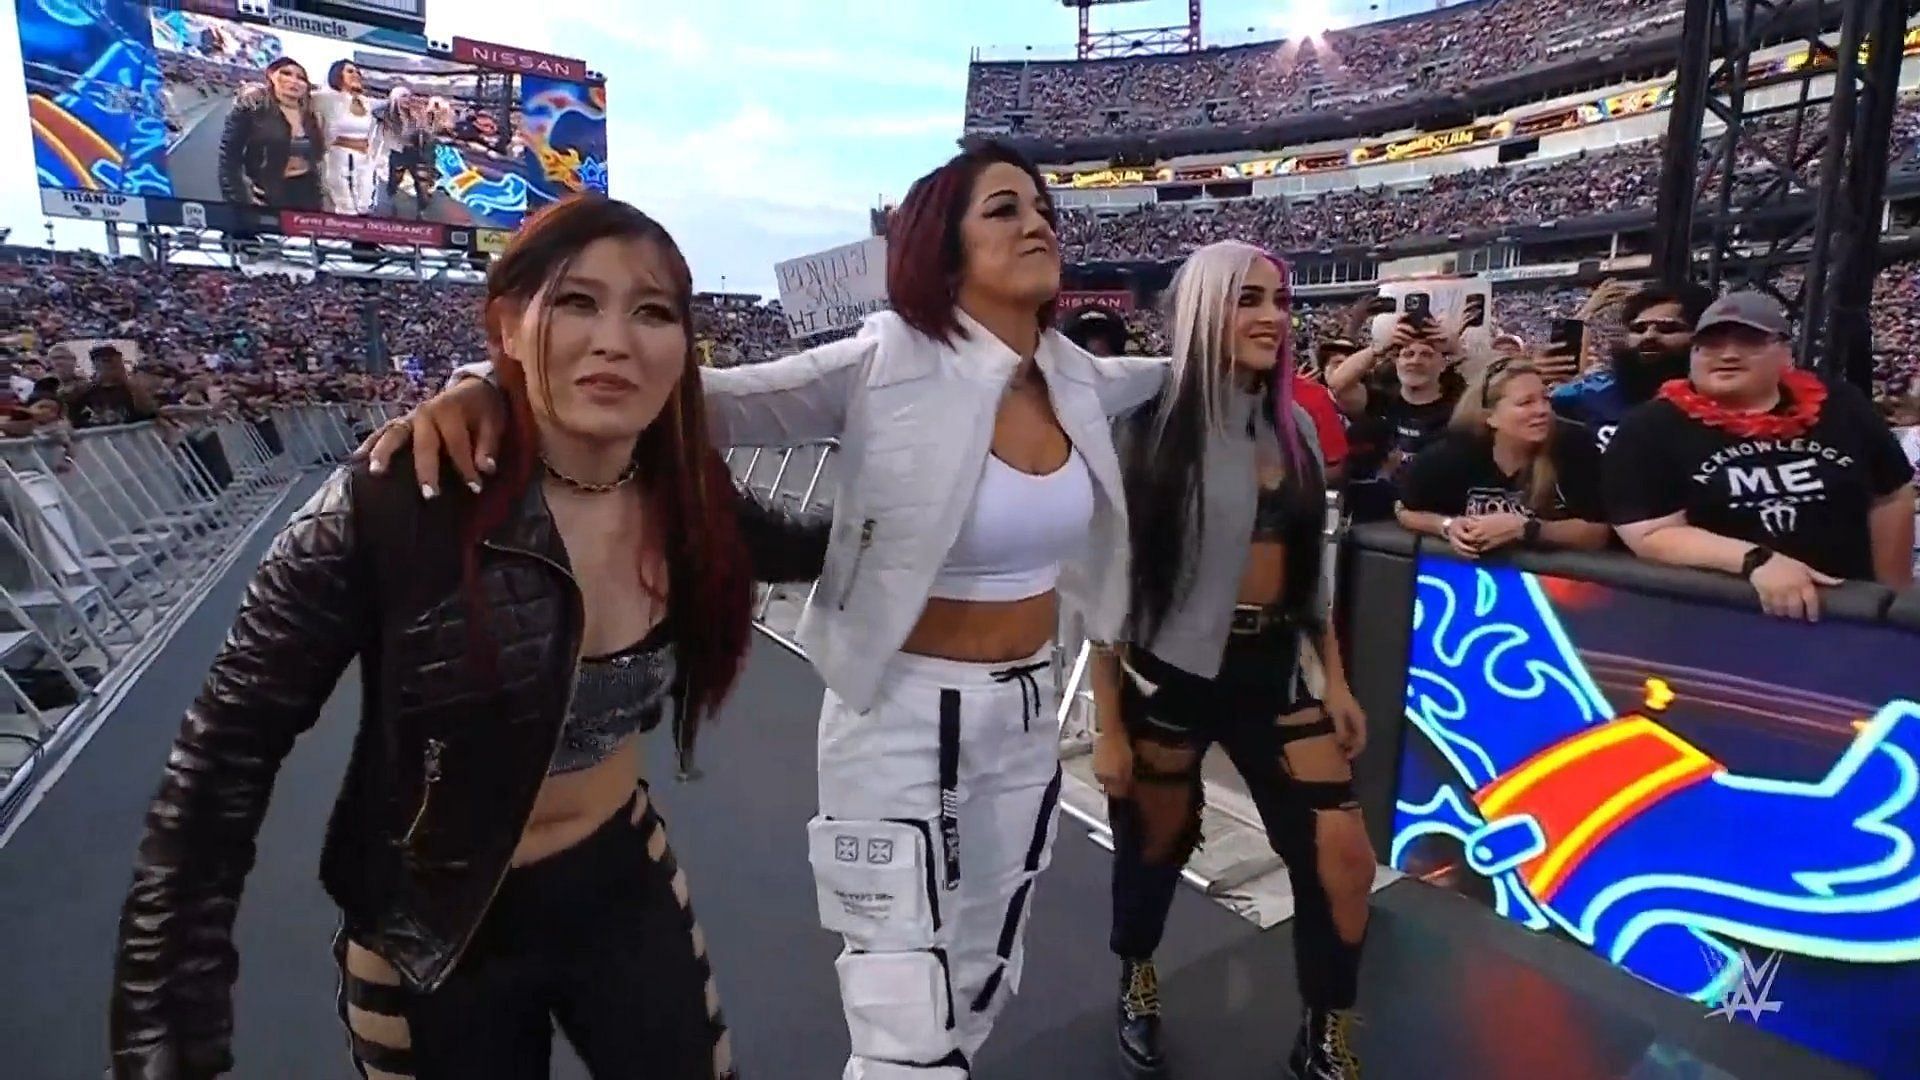 Damage Control first appeared as a group at SummerSlam